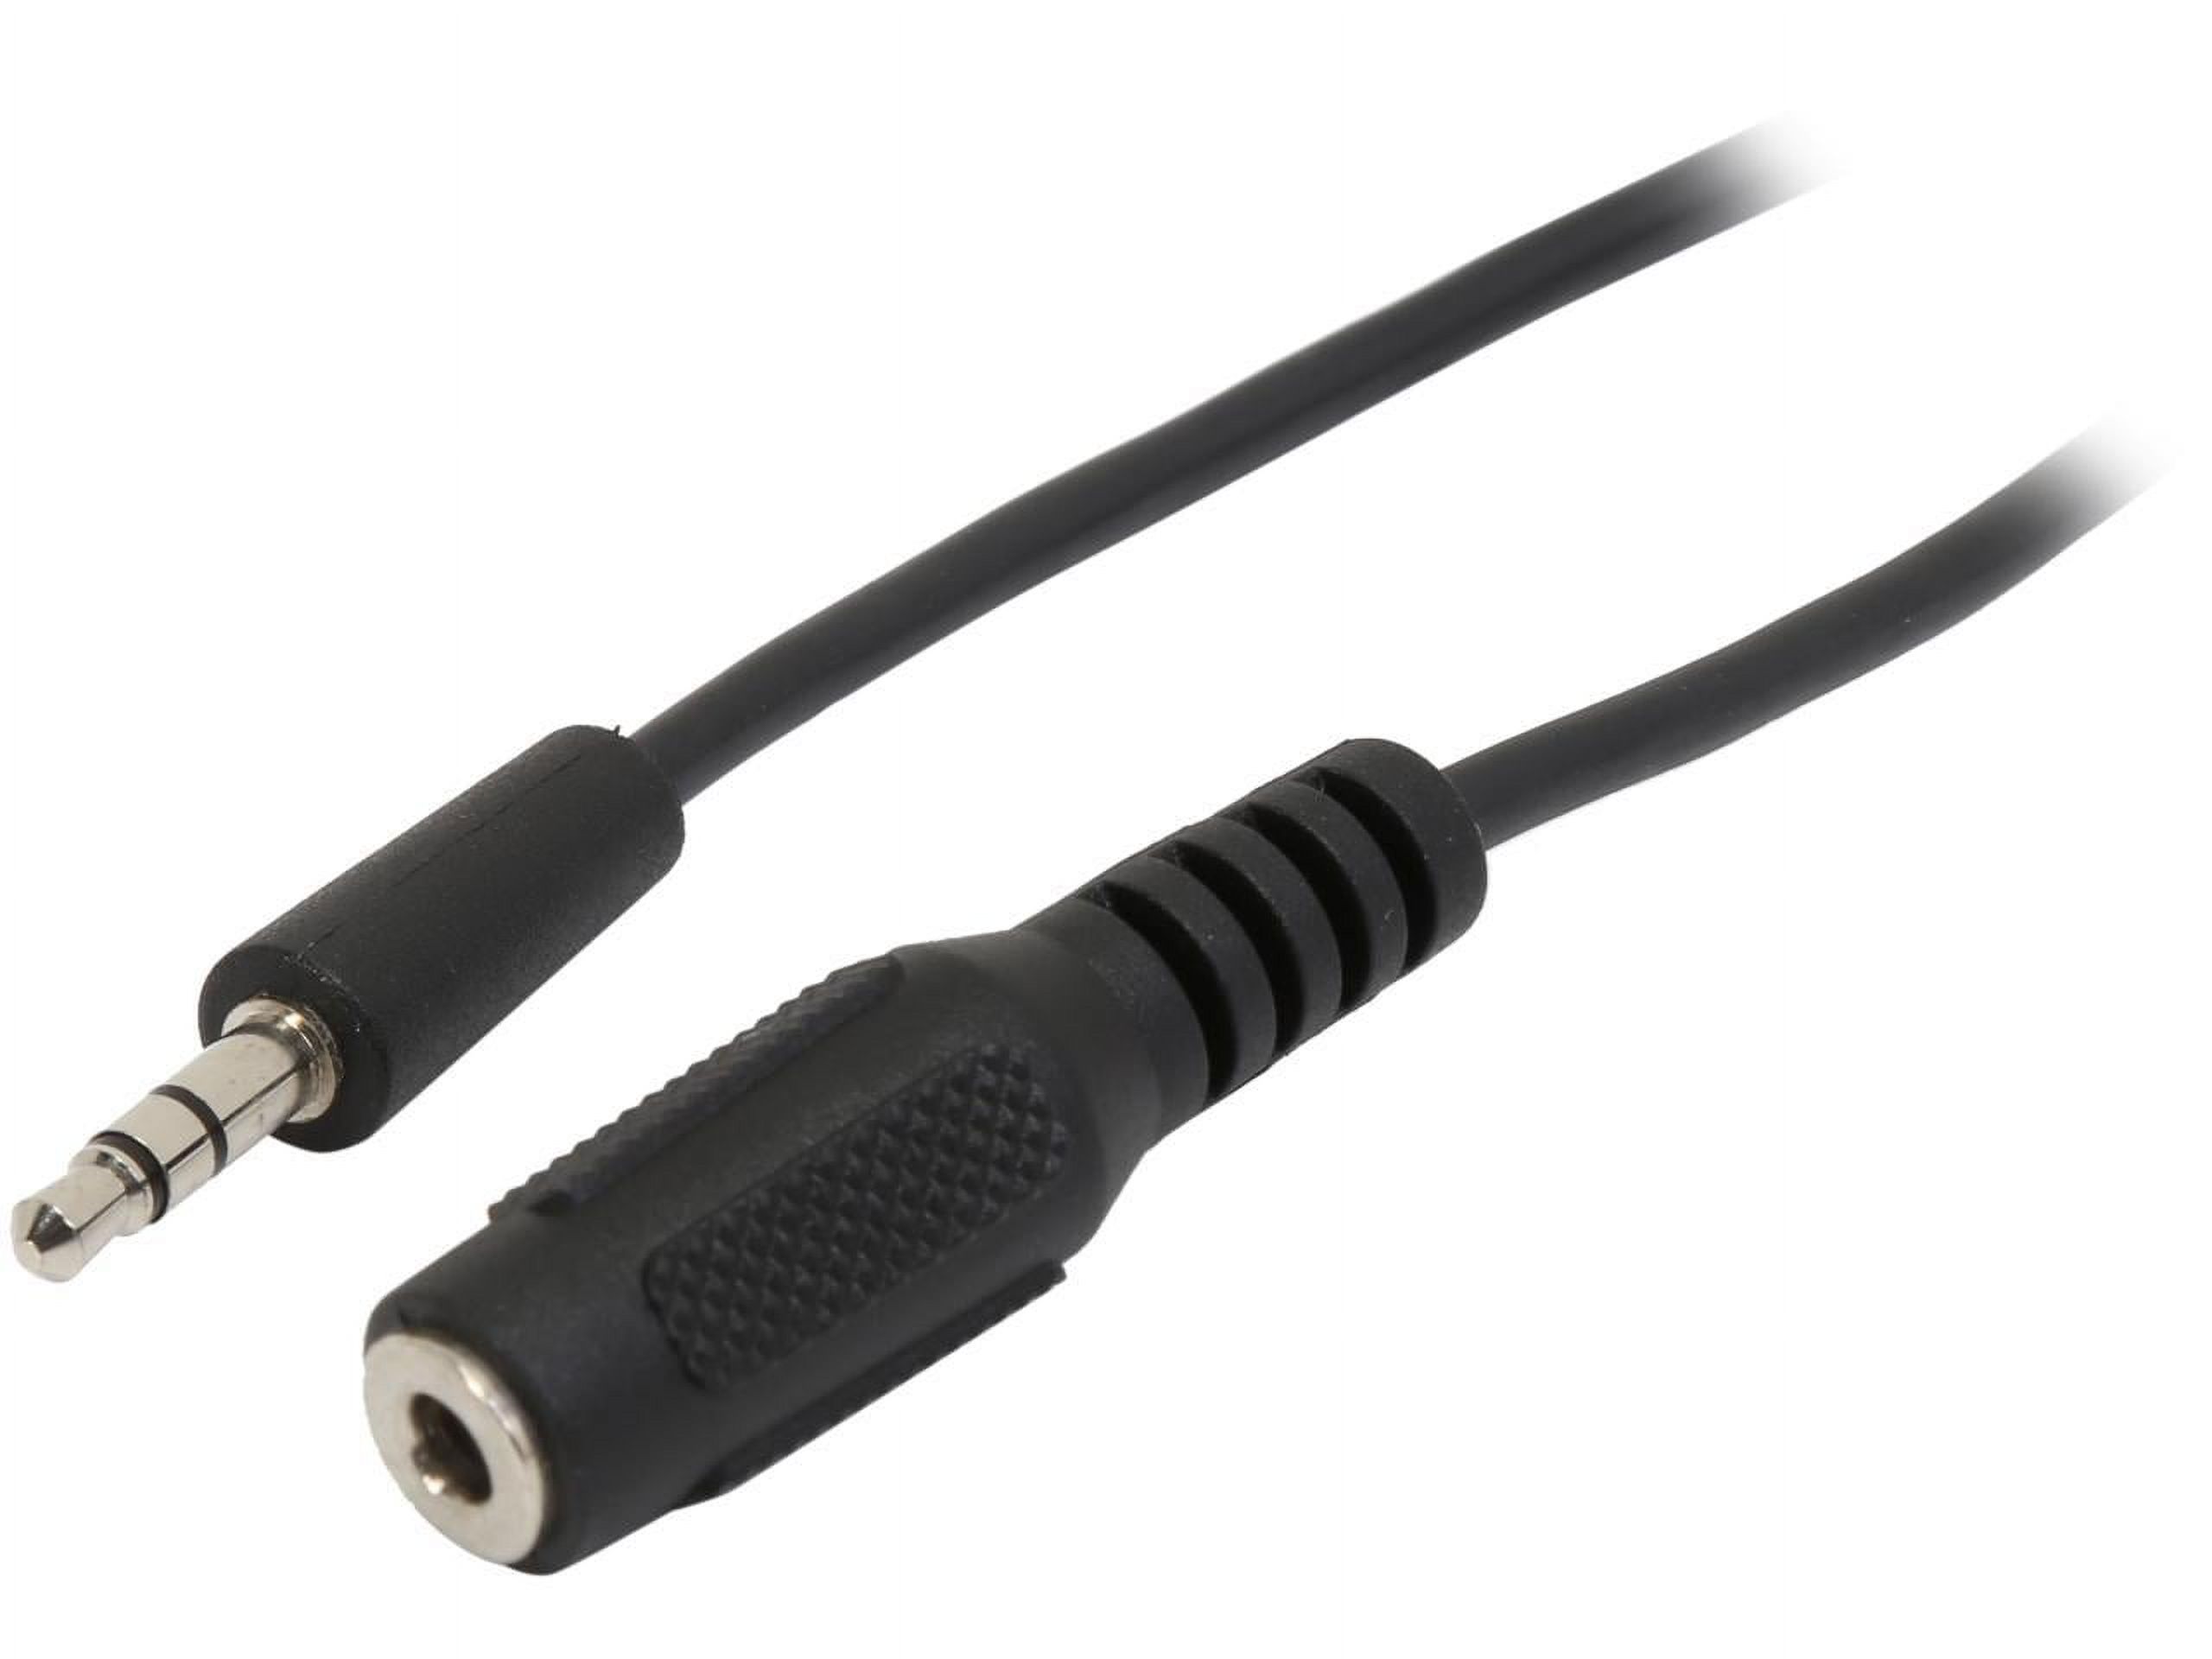 Tripp Lite P311-010 10 ft. (3m) 3.5mm M/F Mini-Stereo Audio Extension Cable Male to Female - image 1 of 3